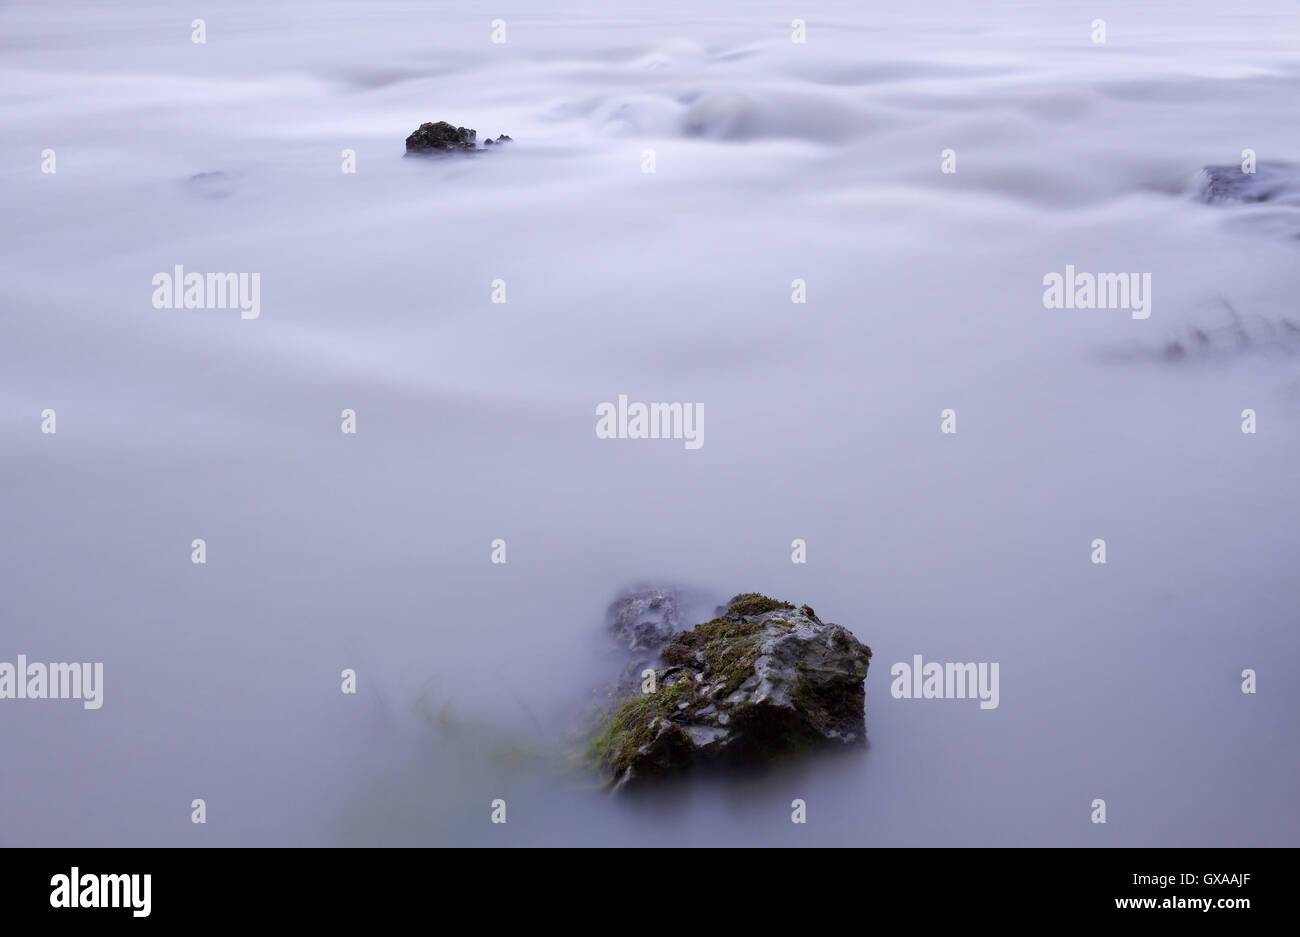 An abstract nature nackground: water surface of the Katun river that flows through the Altai mountains (Russia). Stock Photo